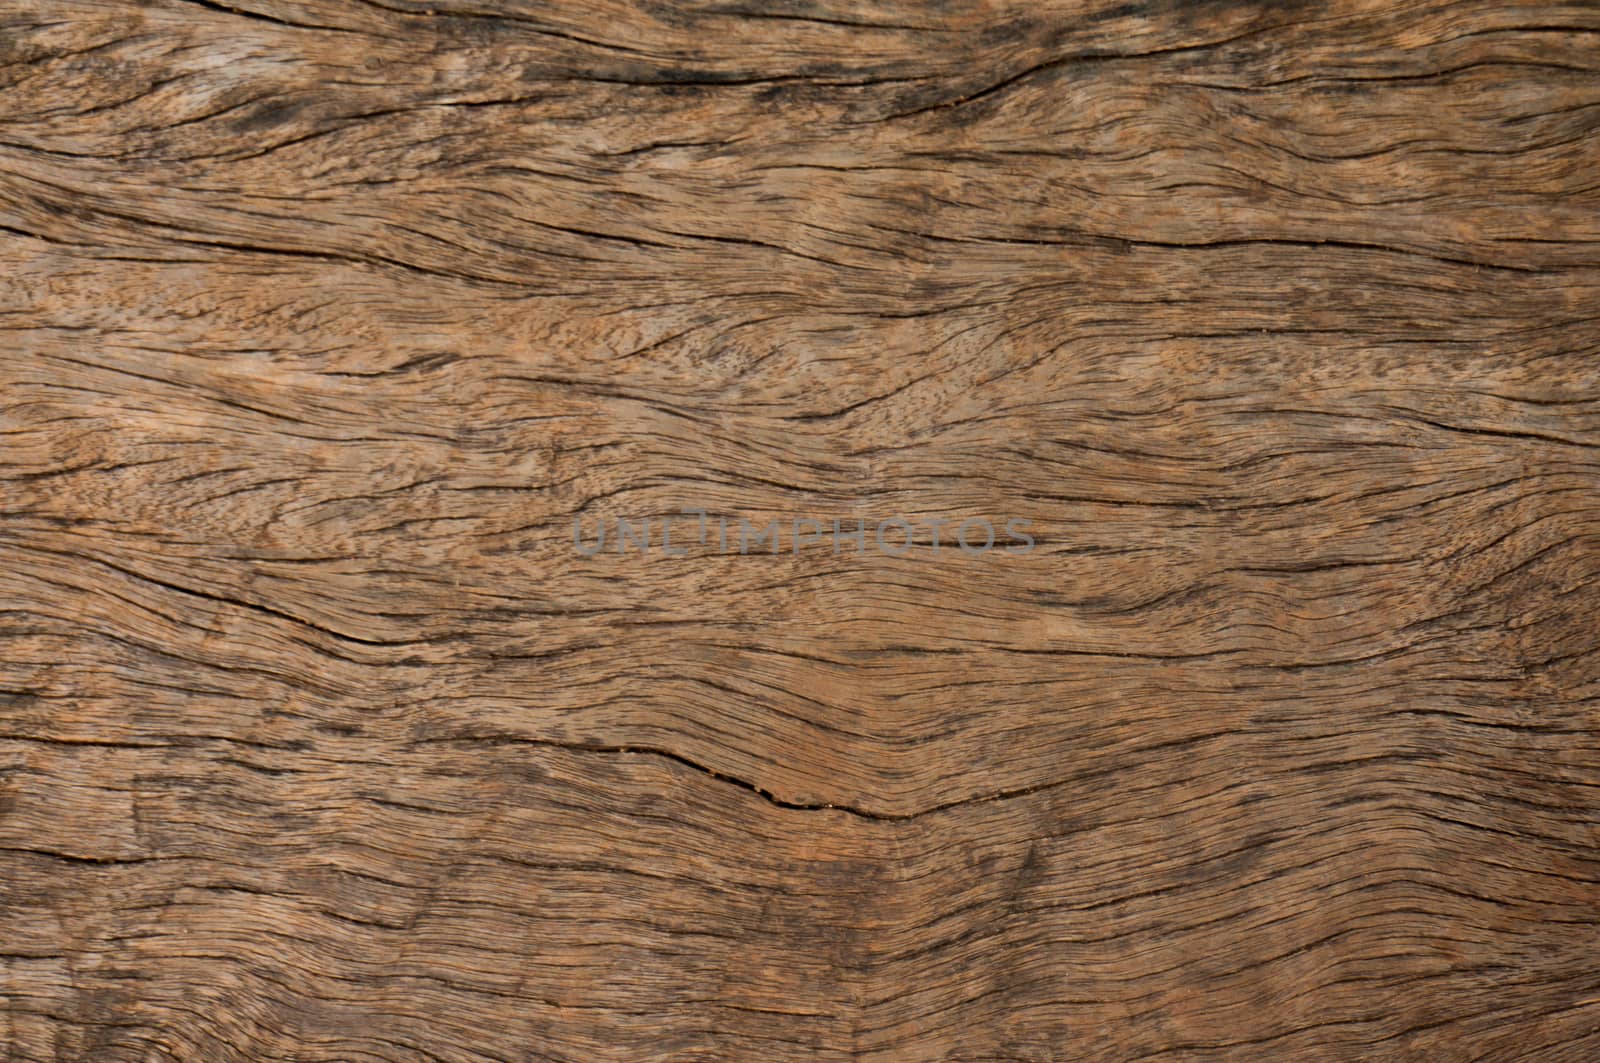 Wood texture with natural pattern, wooden background by peandben